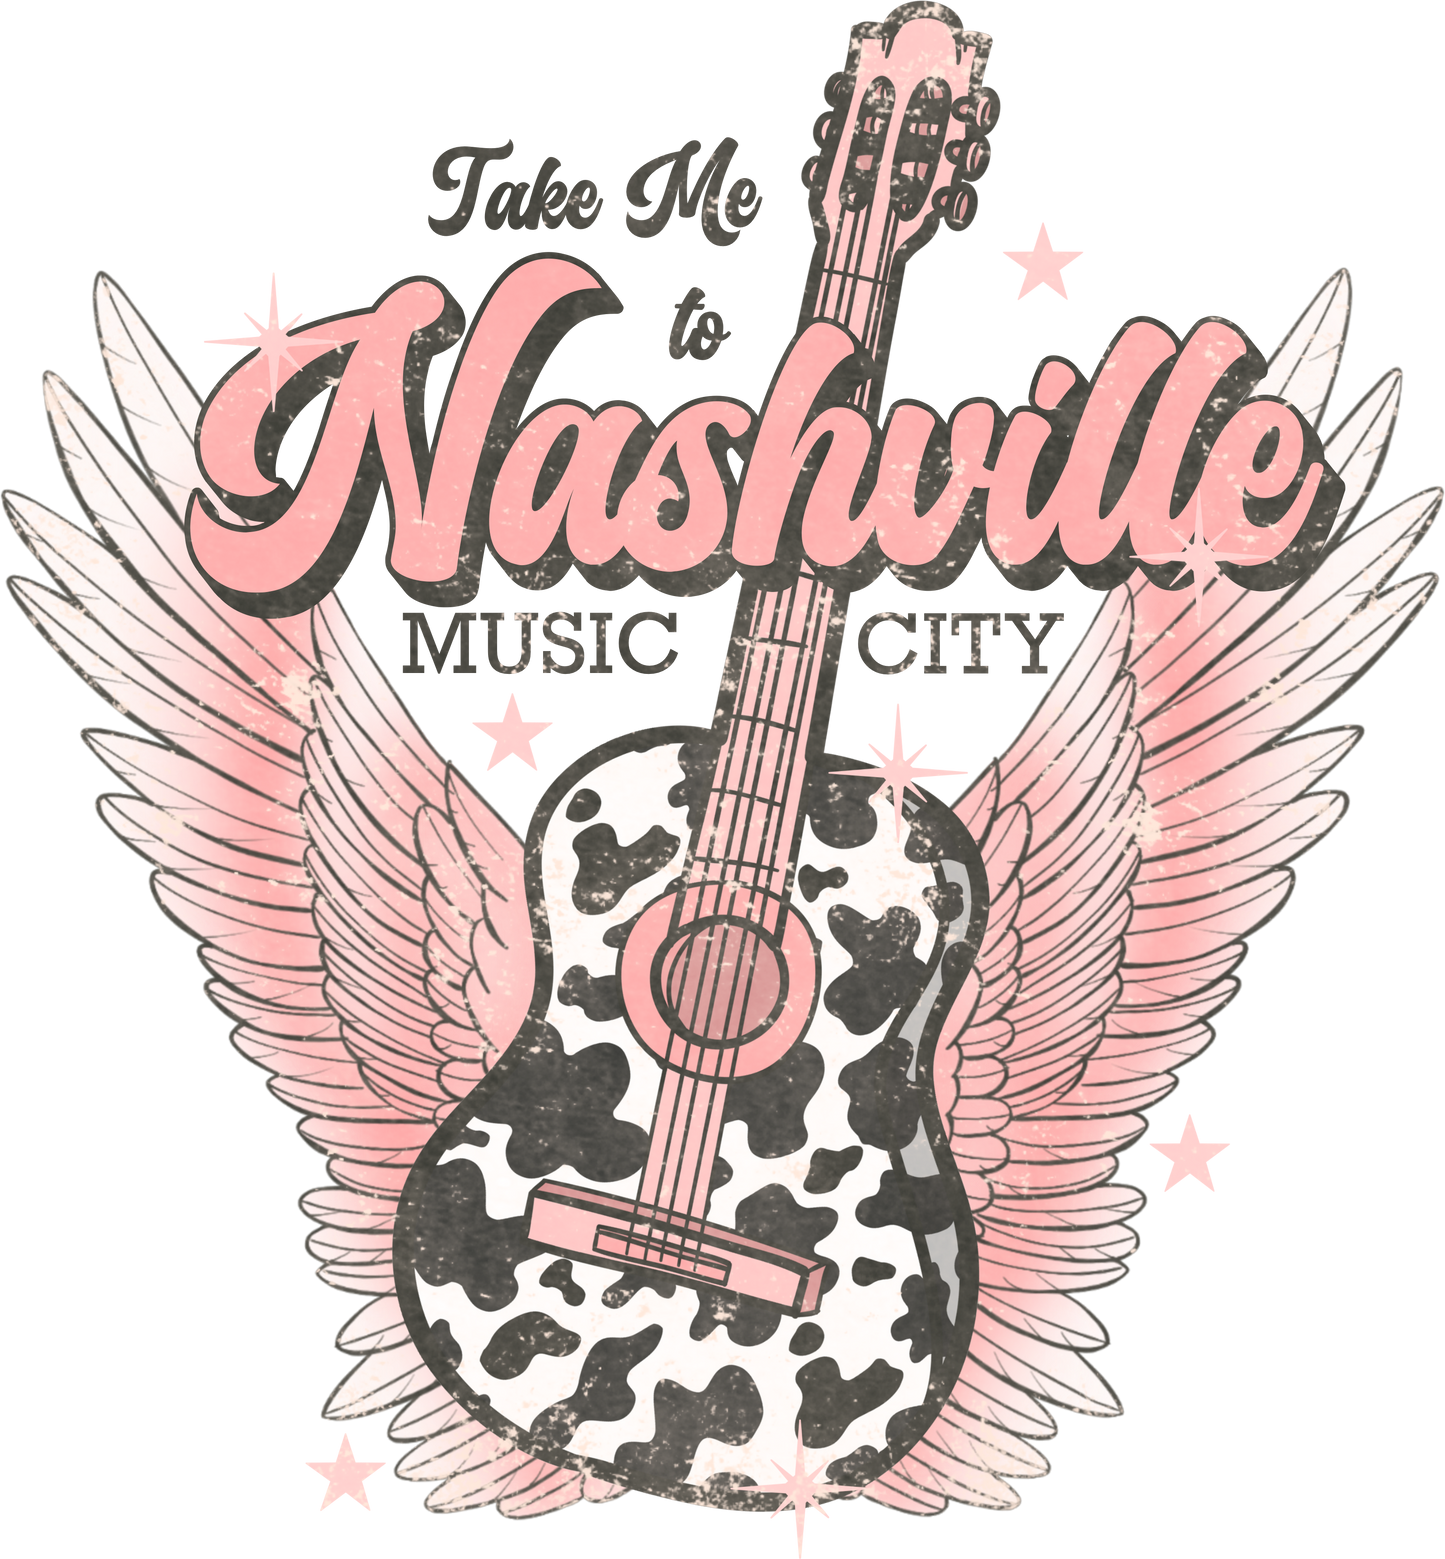 Take me to Nashville Music City Country Retro Guitar Direct To Film (DTF) Transfer